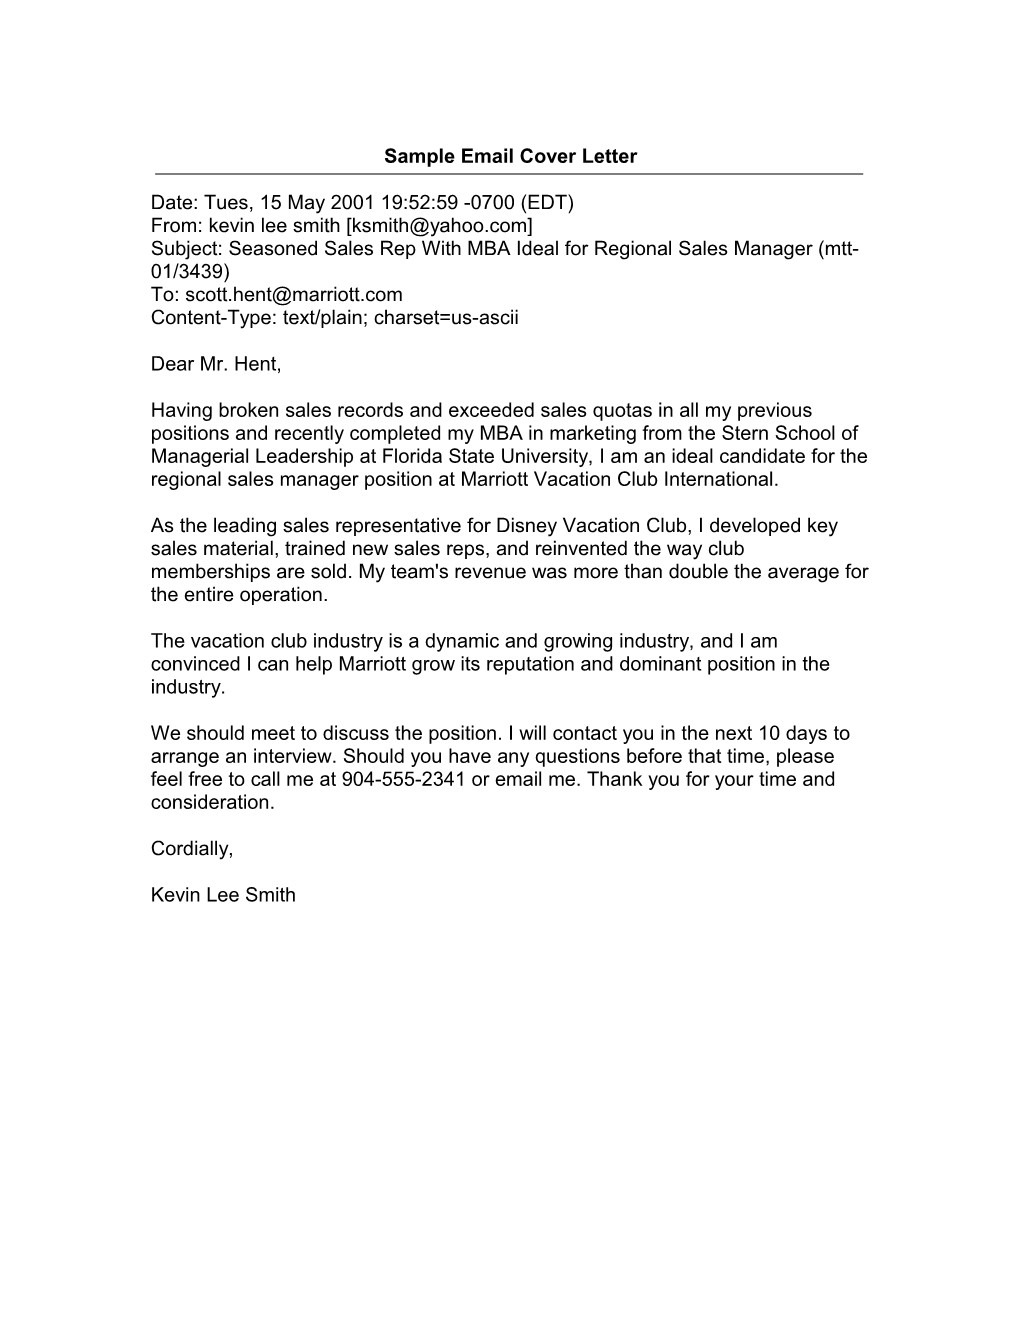 Sample Cold Call Cover Letter